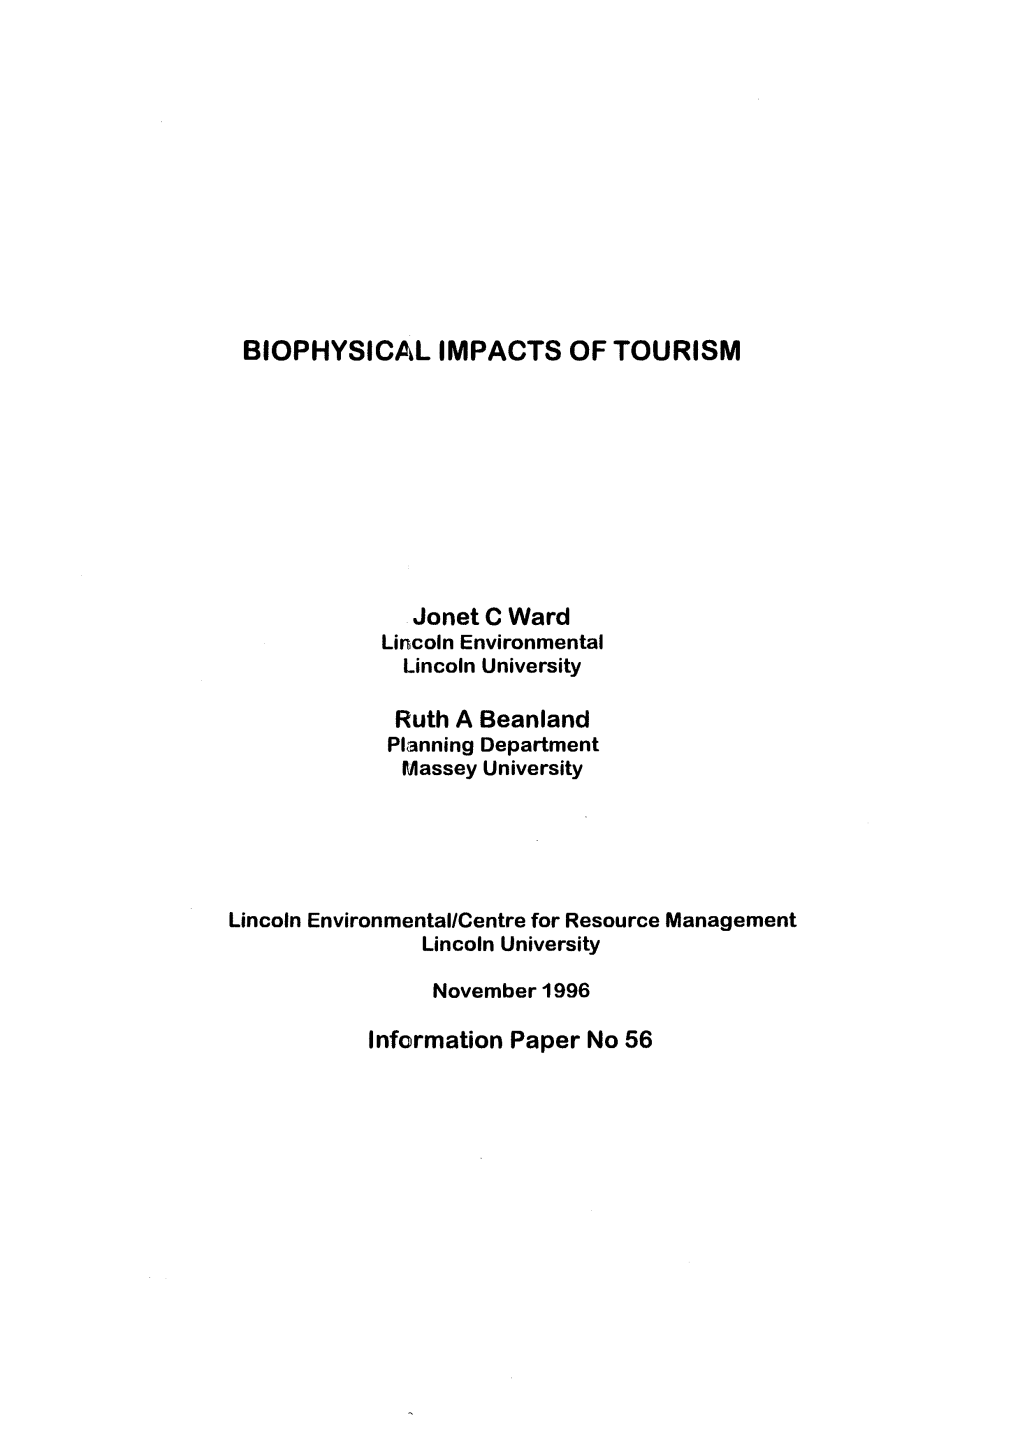 Biophysical Impacts of Tourism